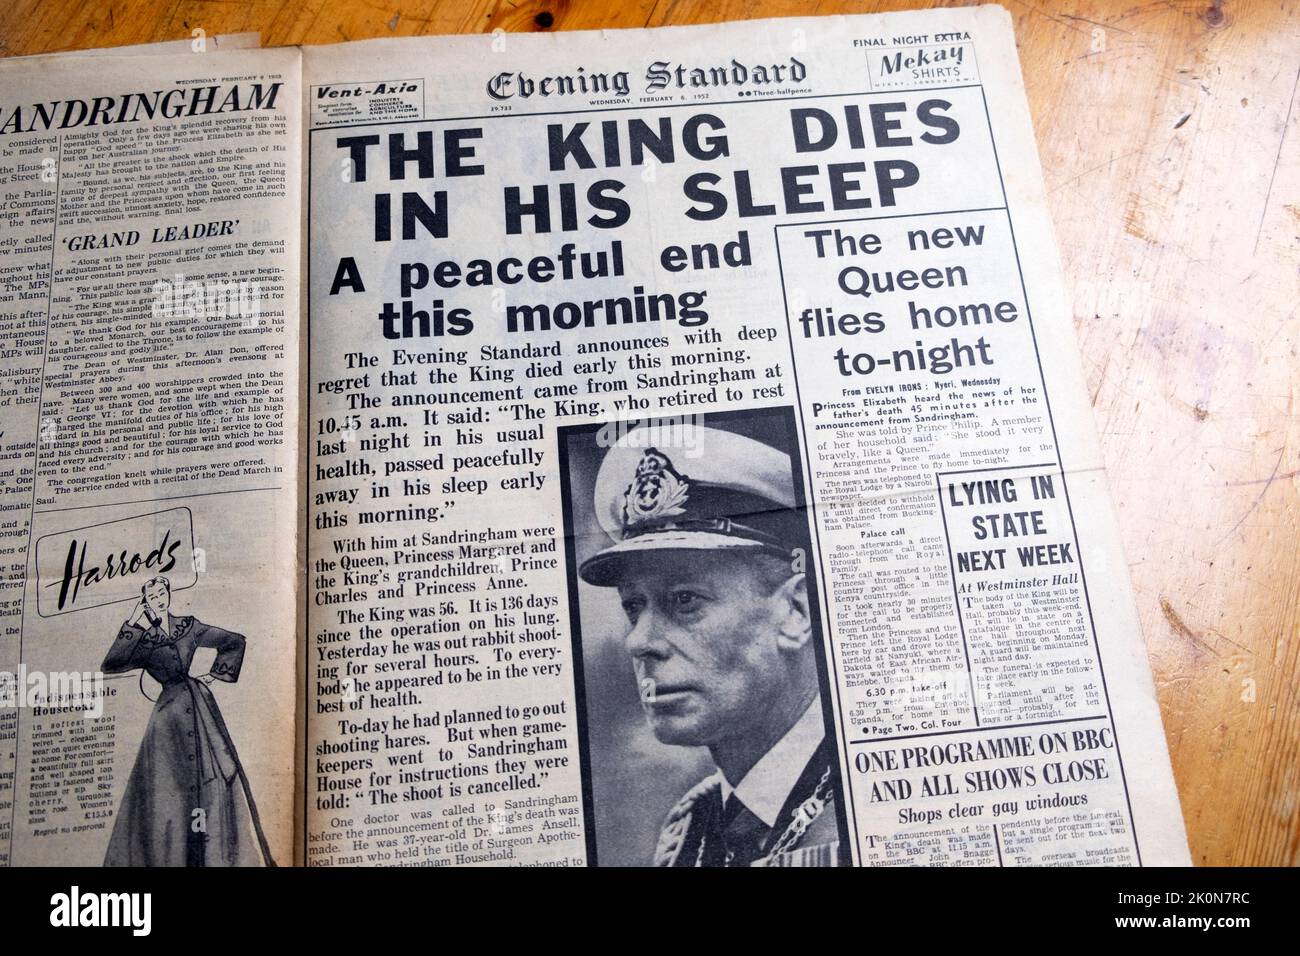 King George VI front page Evening Standard newspaper headline 'The King Dies in His Sleep' and 'The new Queen flies home' February 6 1952 London England UK Stock Photo